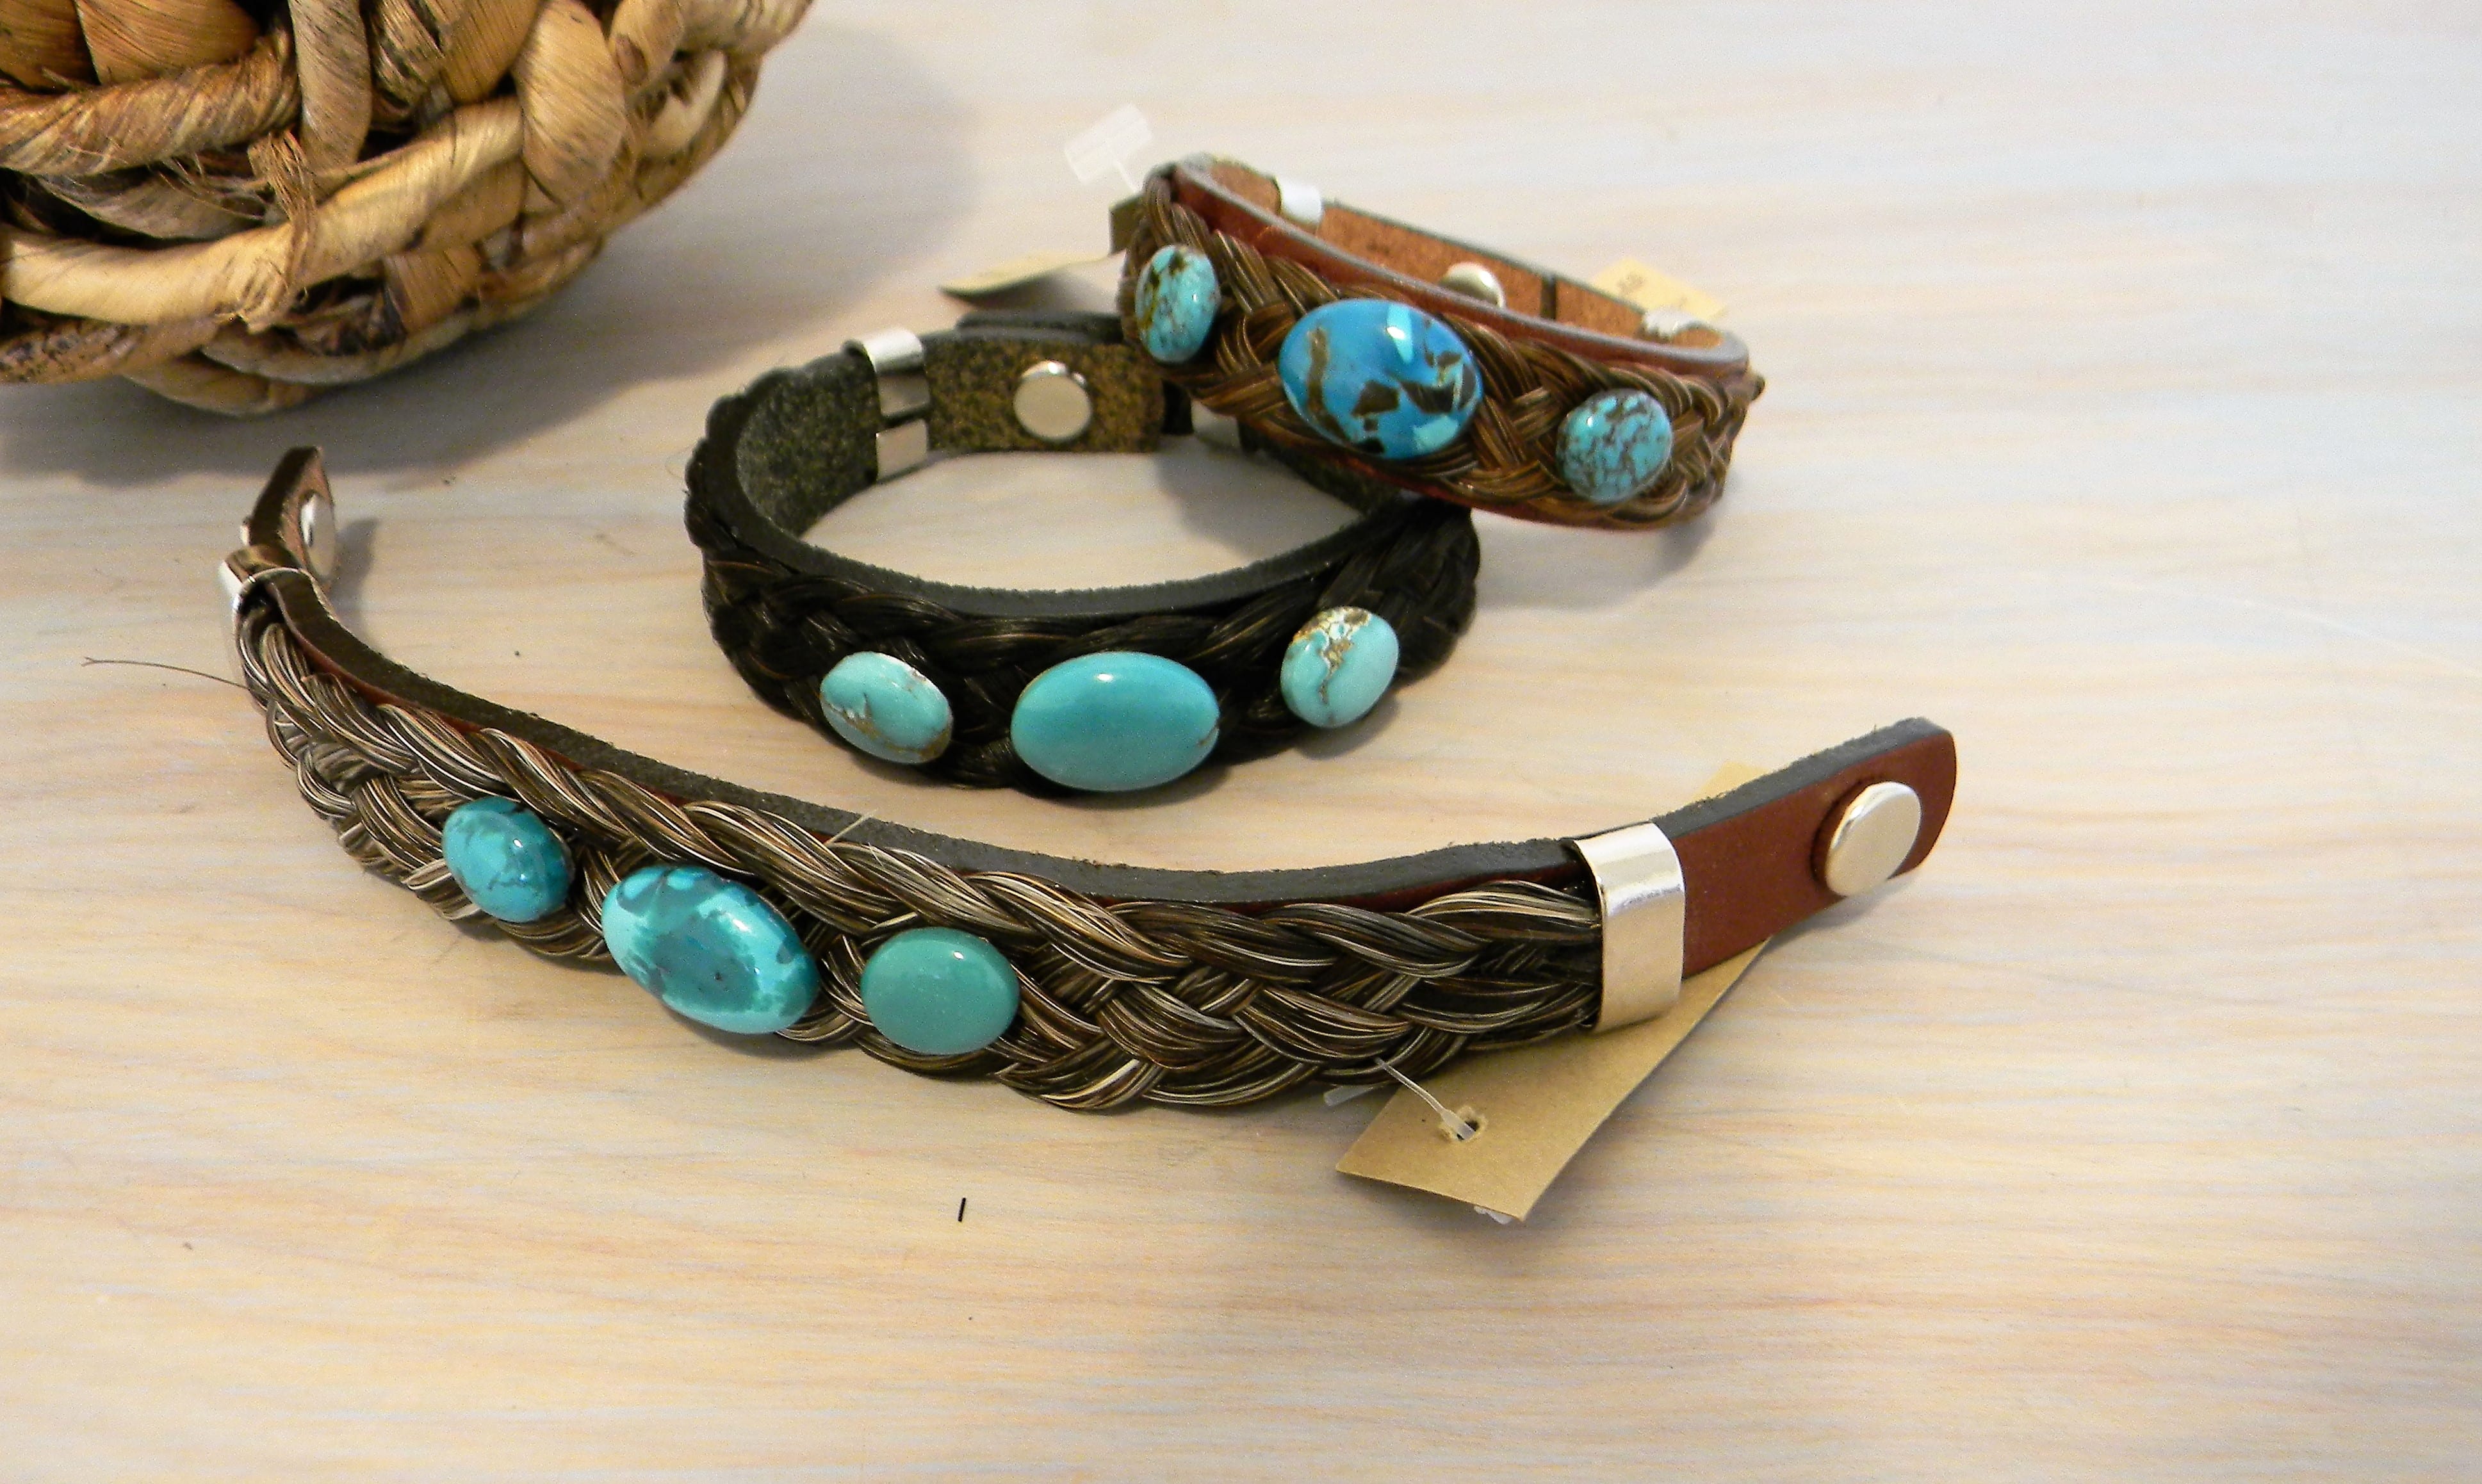 Horsehair Bracelet with Turquoise Accents - Corolla Wild Horse Fund